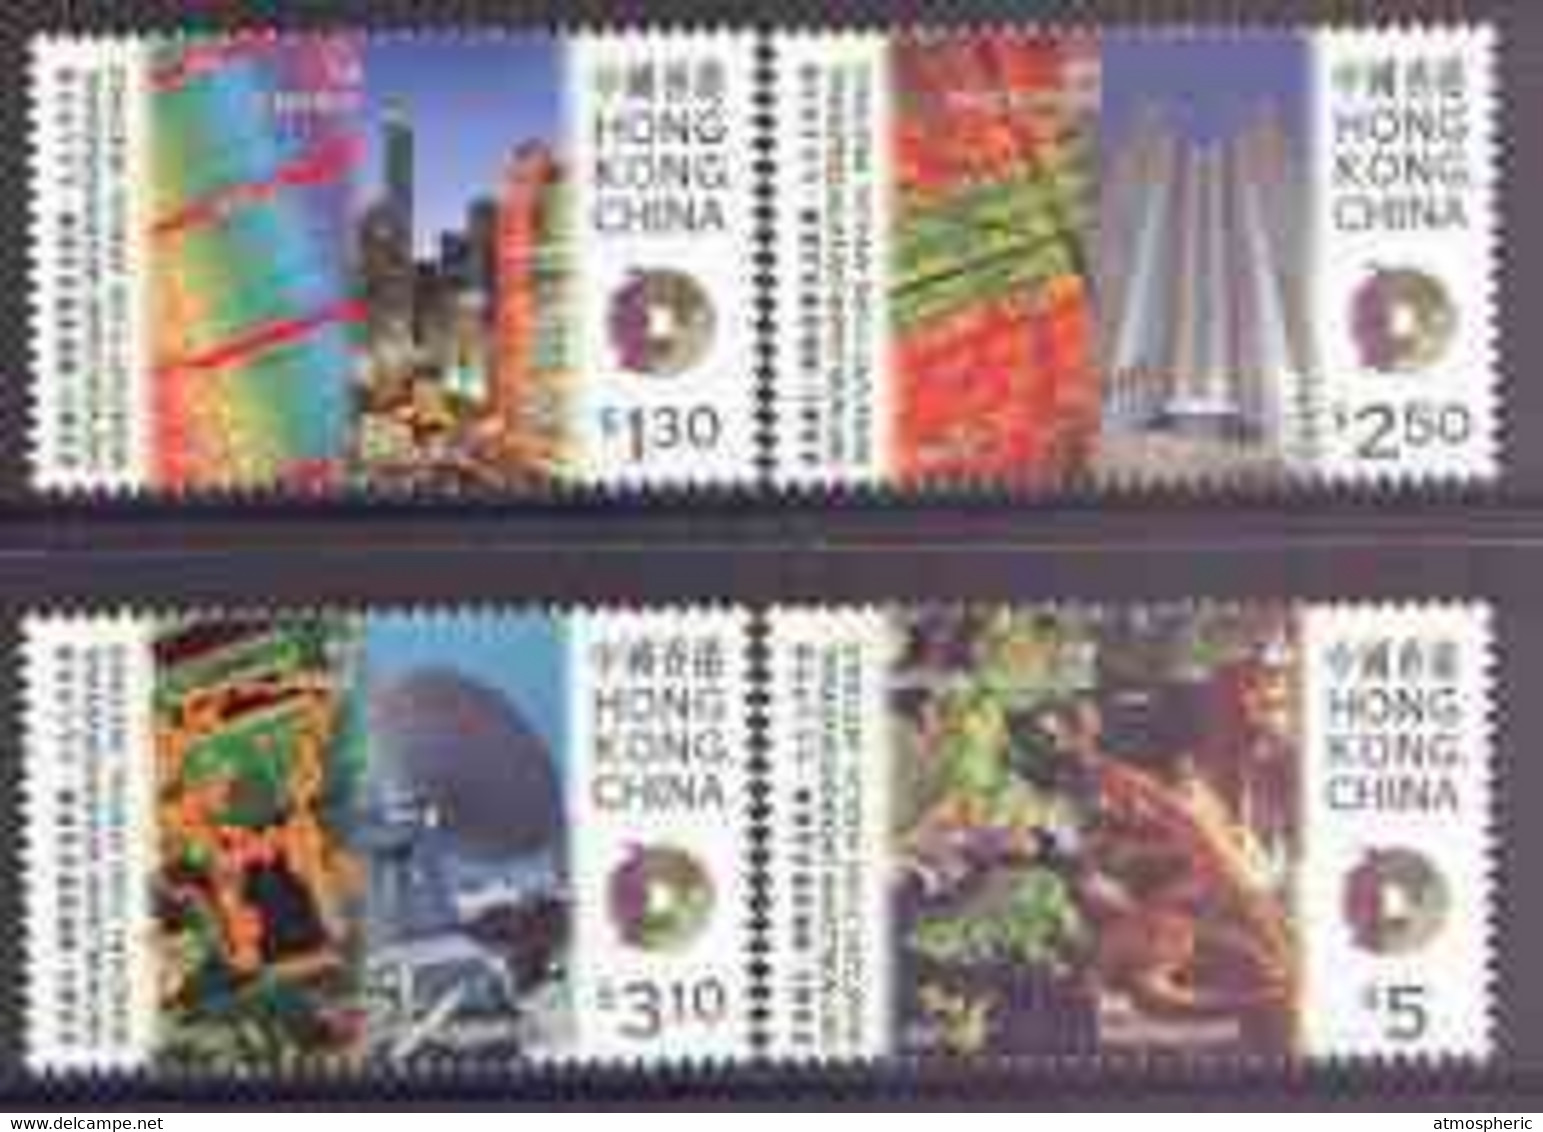 Hong Kong 1997 World Bank Group & IMF Meeting Perf Set Of 4 Unmounted Mint, SG 907-10 - Covers & Documents